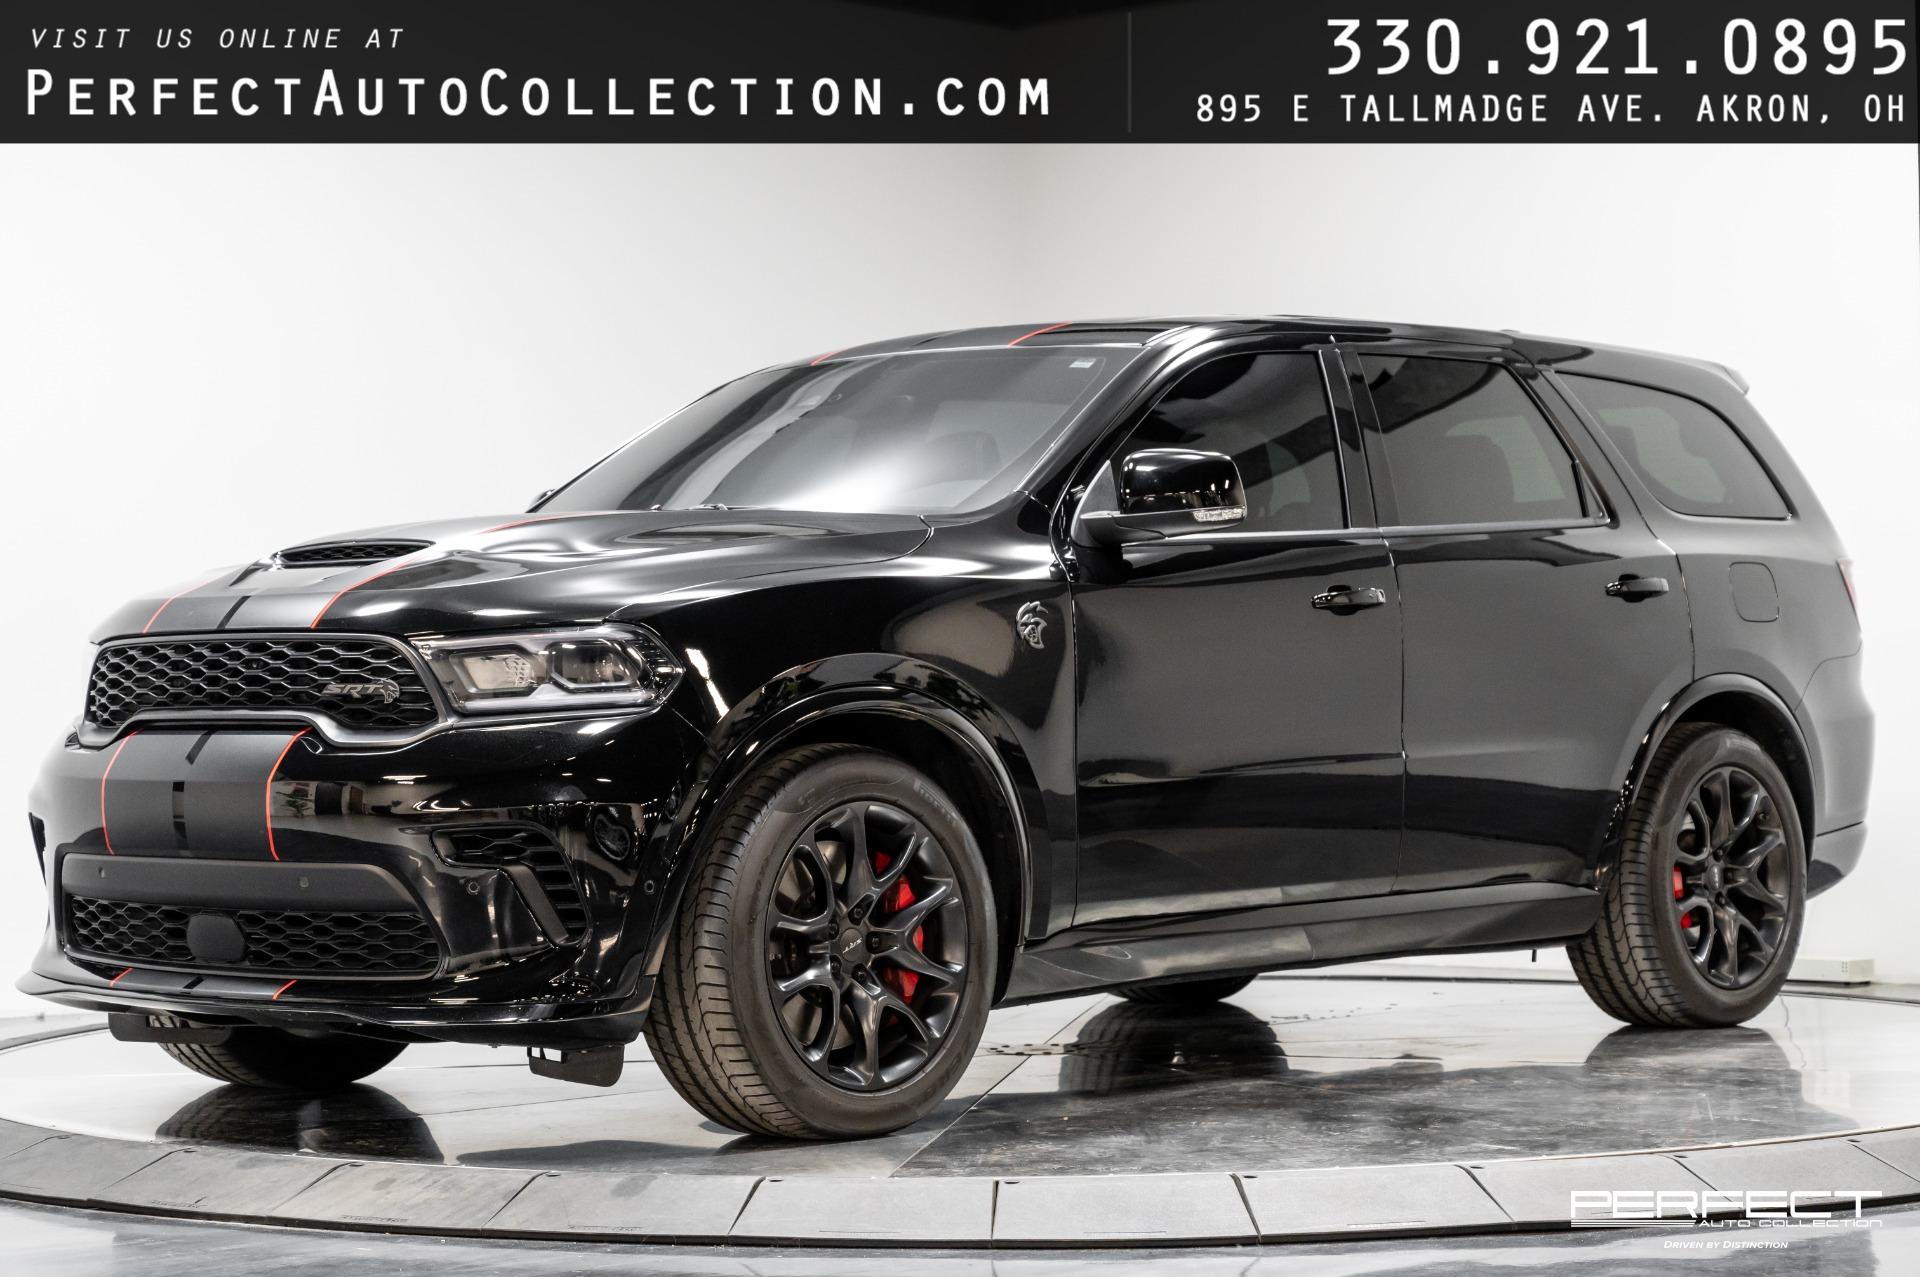 Used 2021 Dodge Durango SRT Hellcat For Sale (Sold) Perfect Auto